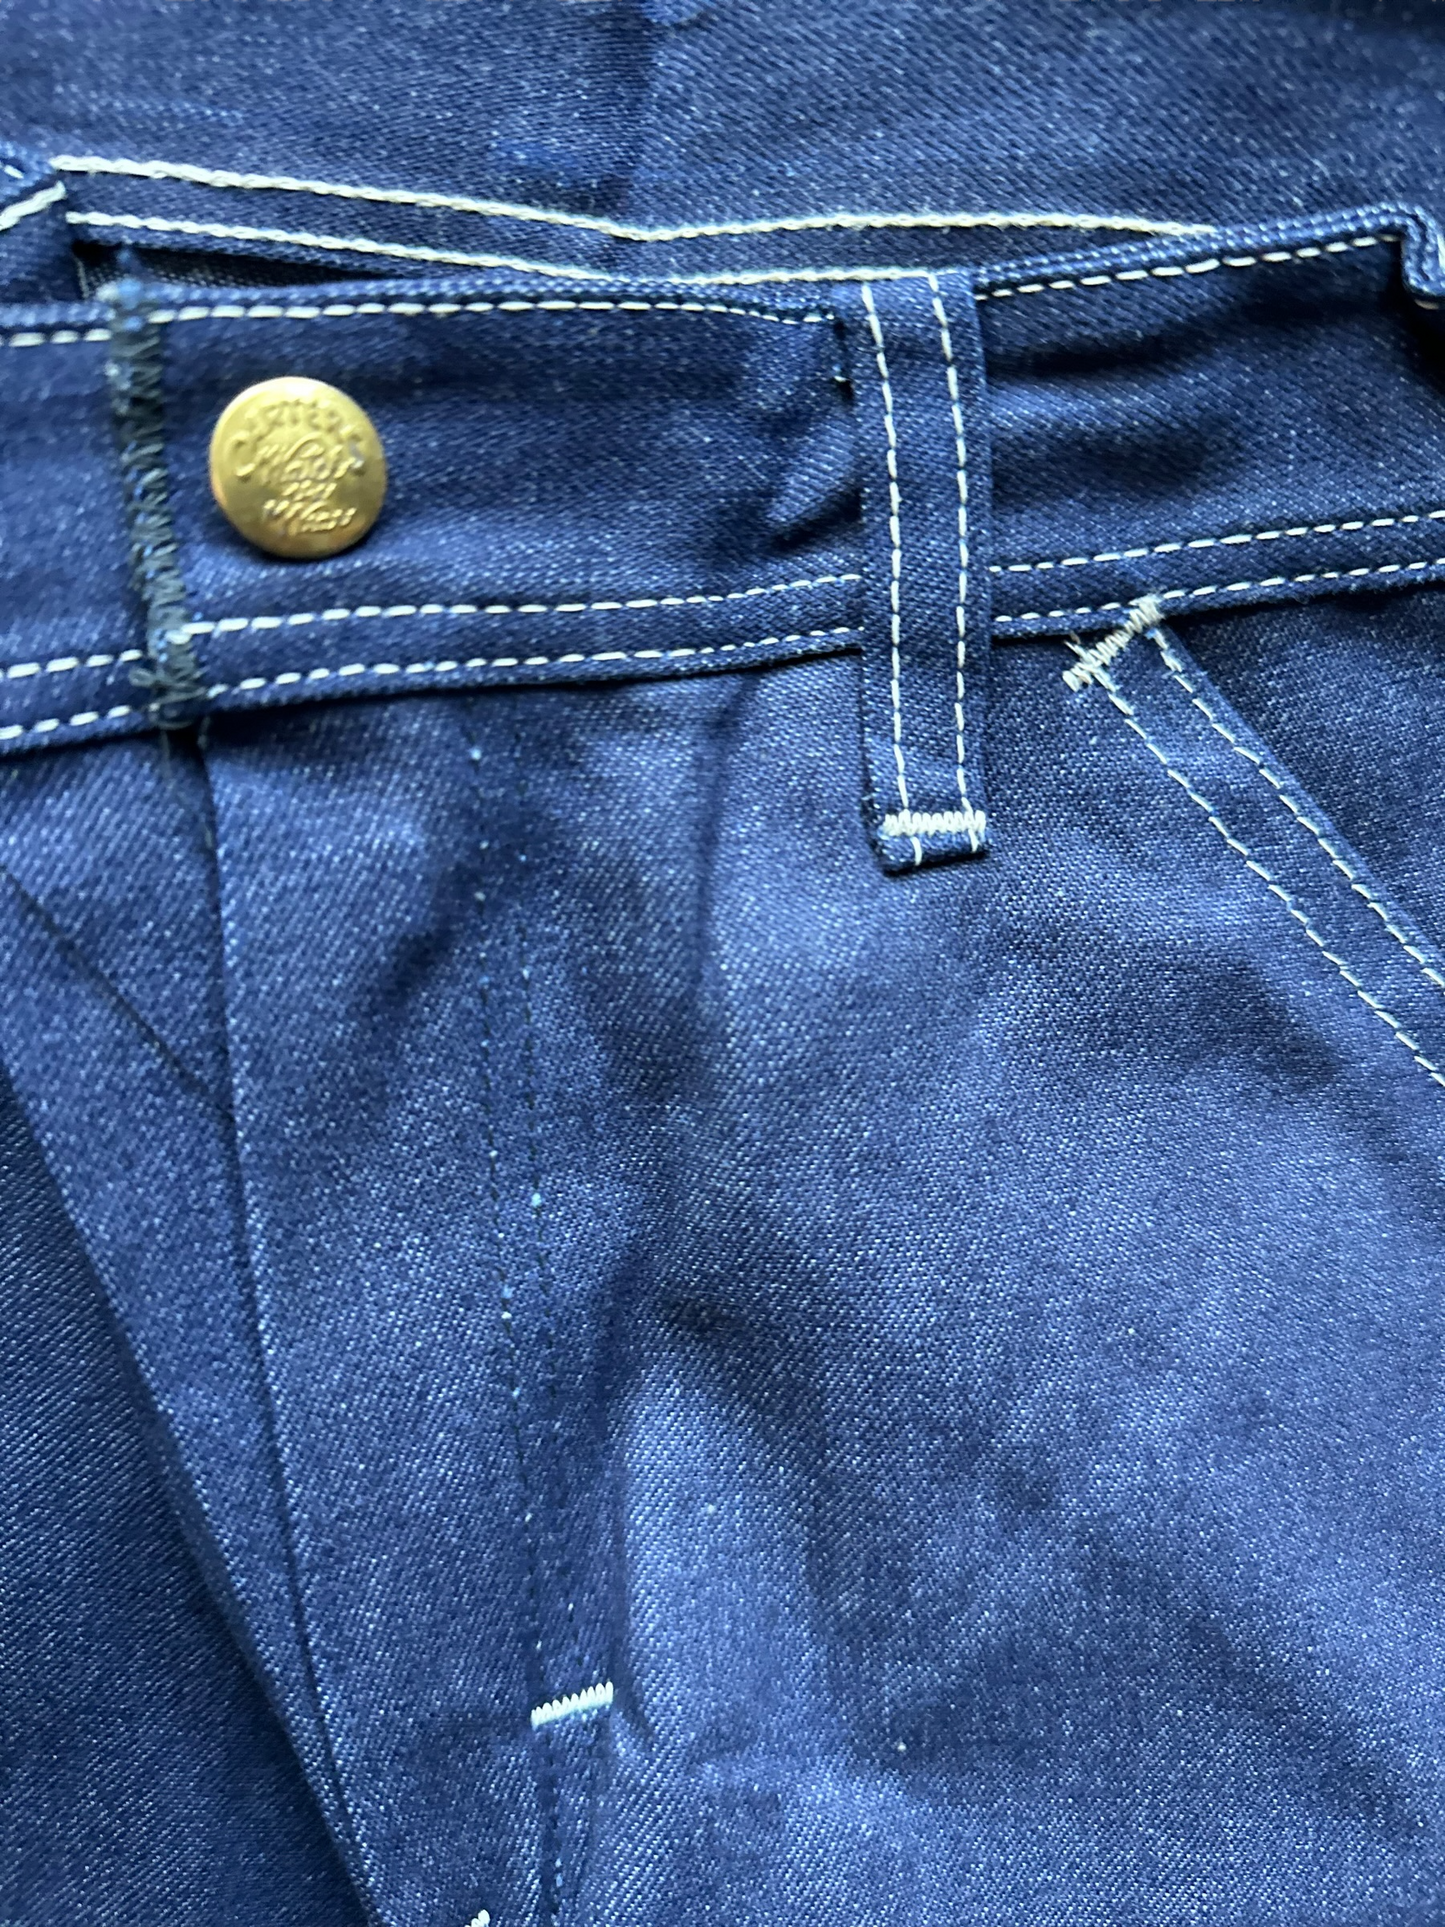 Snap View of New Old Stock Vintage Carter's Carpenter Dungarees W29 L30 | Vintage Workwear Seattle | Barn Owl Vintage Clothing